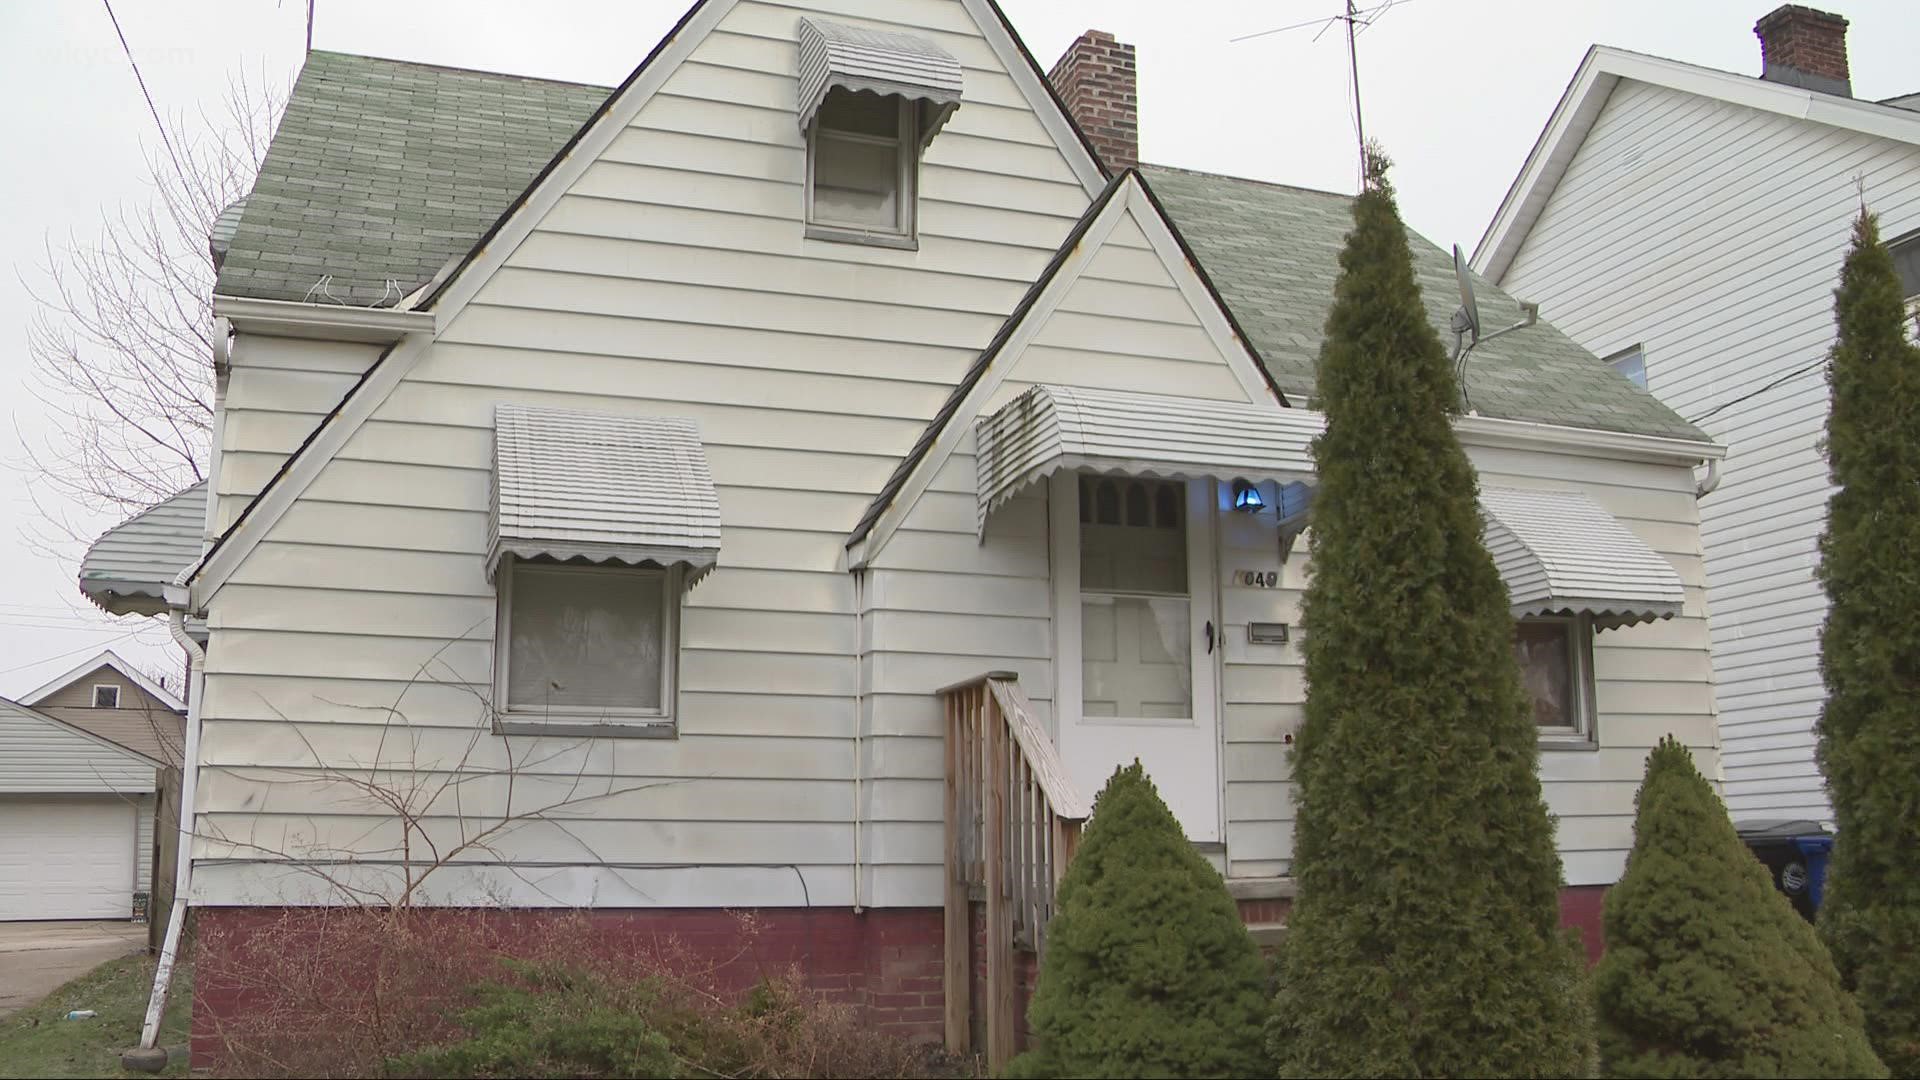 New details on a body found buried in a basement at this home on Cleveland's west side. Isabel Lawrence has the latest.